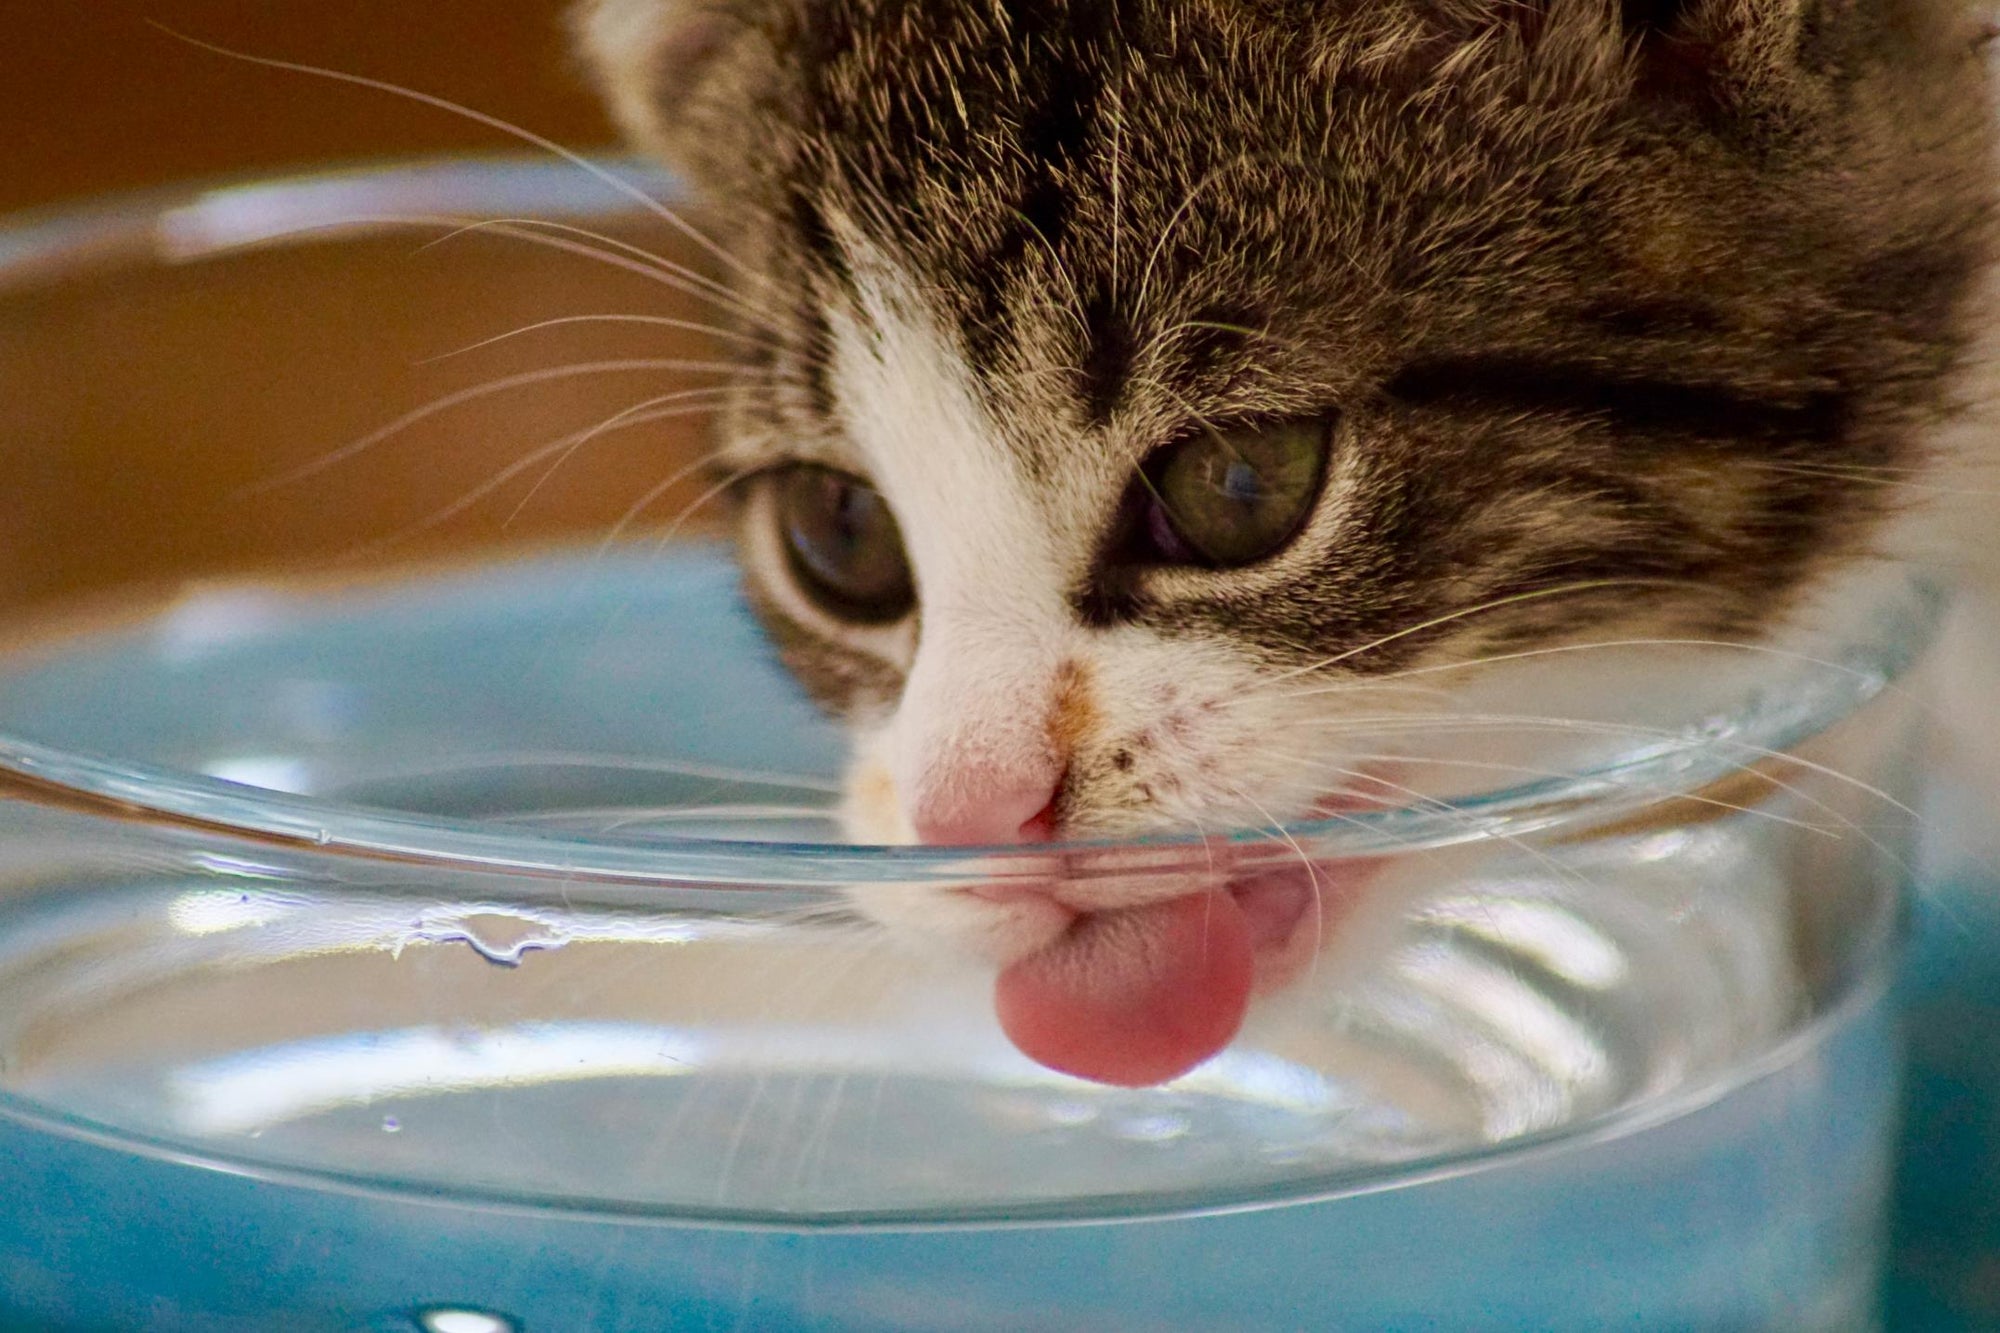 How to Help Your Cat Drink More Water?